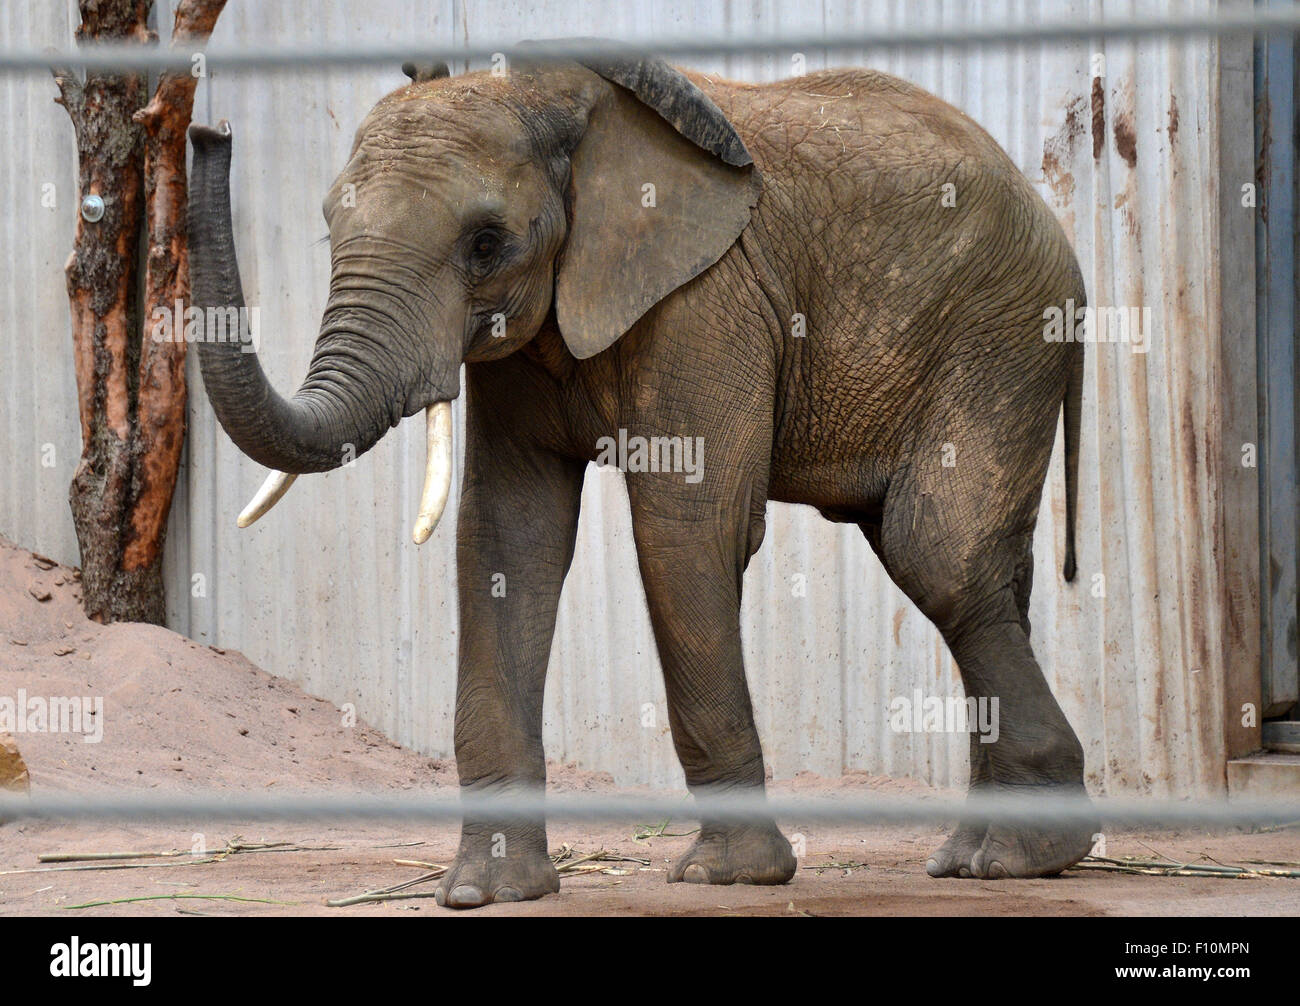 Erfurt, Germany. 24th Aug, 2015. Elephant bull 'Kibo', an arrival from the animal park 'Wien-Schoenbrunn', discovers its new enclosure at the elephant house at the zoo in Erfurt, Germany, 24 August 2015. Kibo, a nine-year old African elephant bull arrive from Vienna on 19 August 2015, to support the breeding effort of the zoo in Erfurt. Photo: Martin Schutt/dpa/Alamy Live News Stock Photo